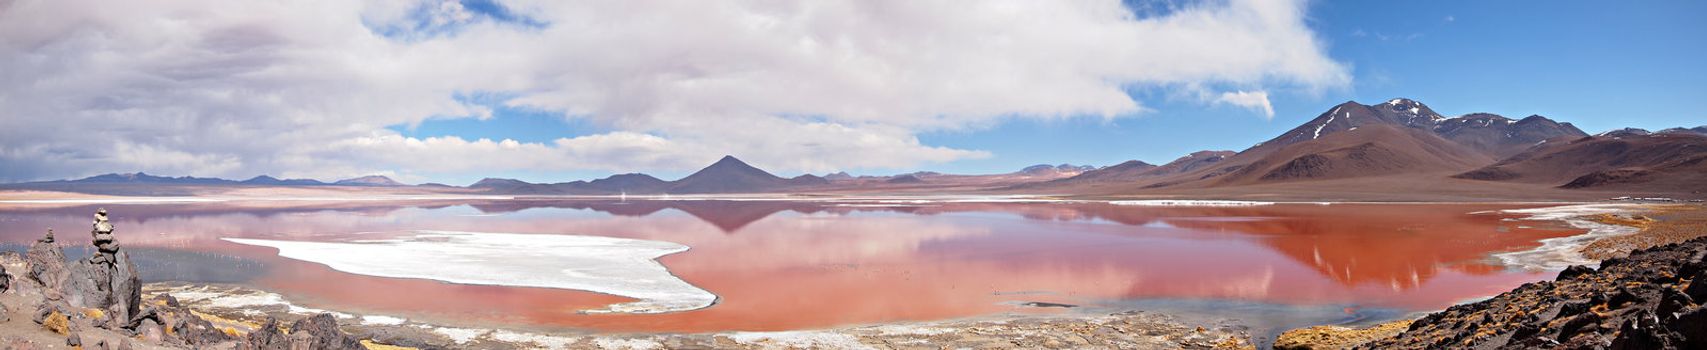 Panorama of the Red Lagoon, or Laguna Colorada, on the Altiplano near Uyuni inside Eduardo Avaroa National Reserve in Bolivia at 4300 m above sea level.  The red color of the water is caused by sediments and algae. The white part is borax salt.